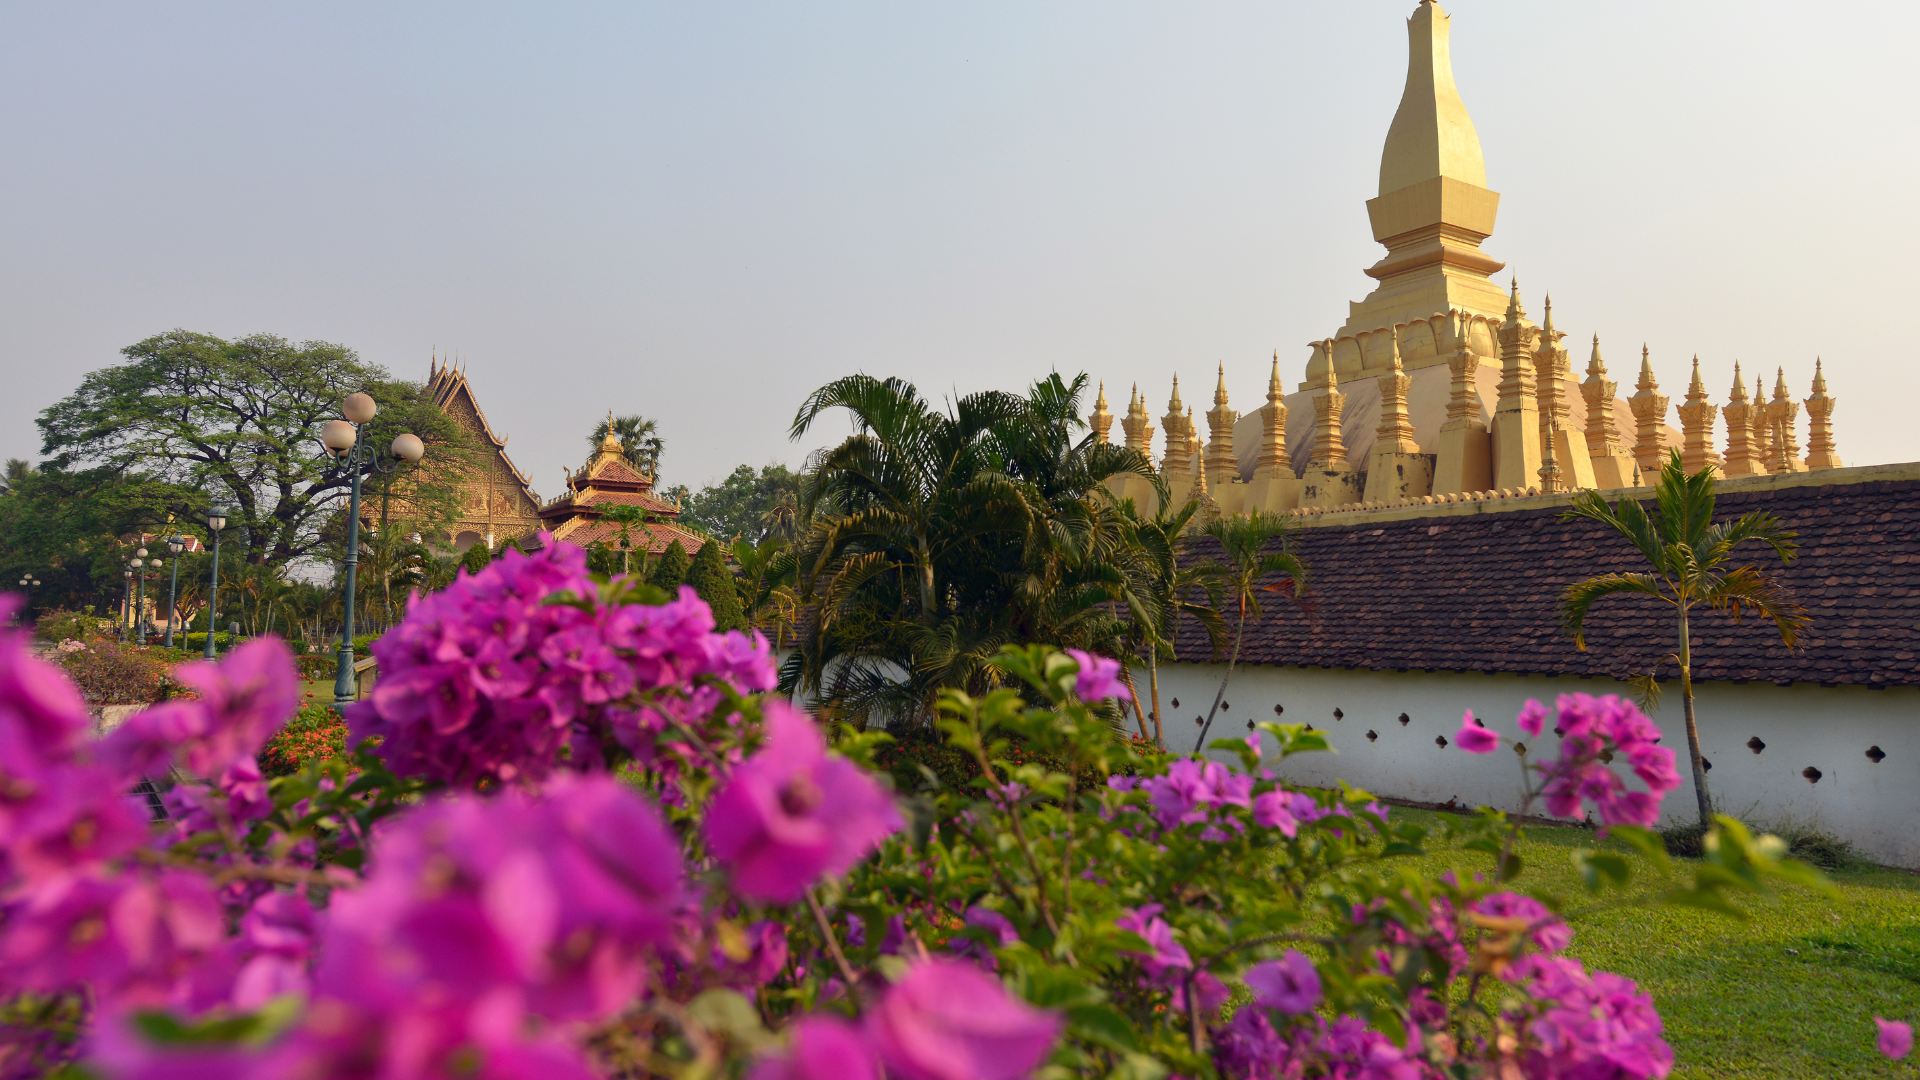 Vientiane, Laos is one of the world's most walkable cities